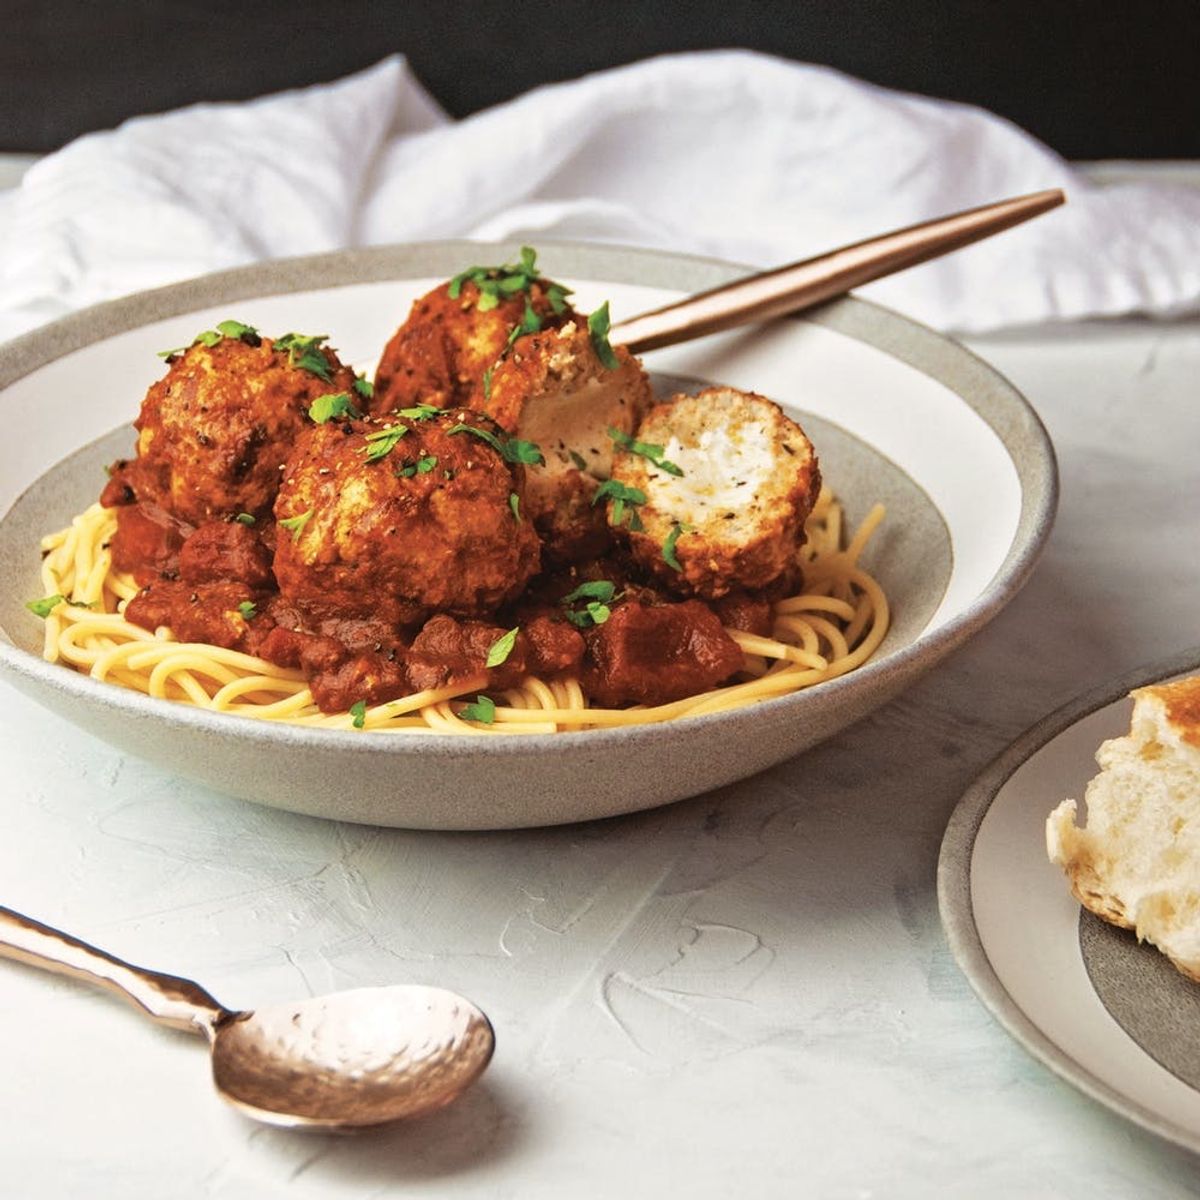 Mozzarella-Stuffed Chicken Meatballs Are Easy, Cheesy, and Slow-Cooked